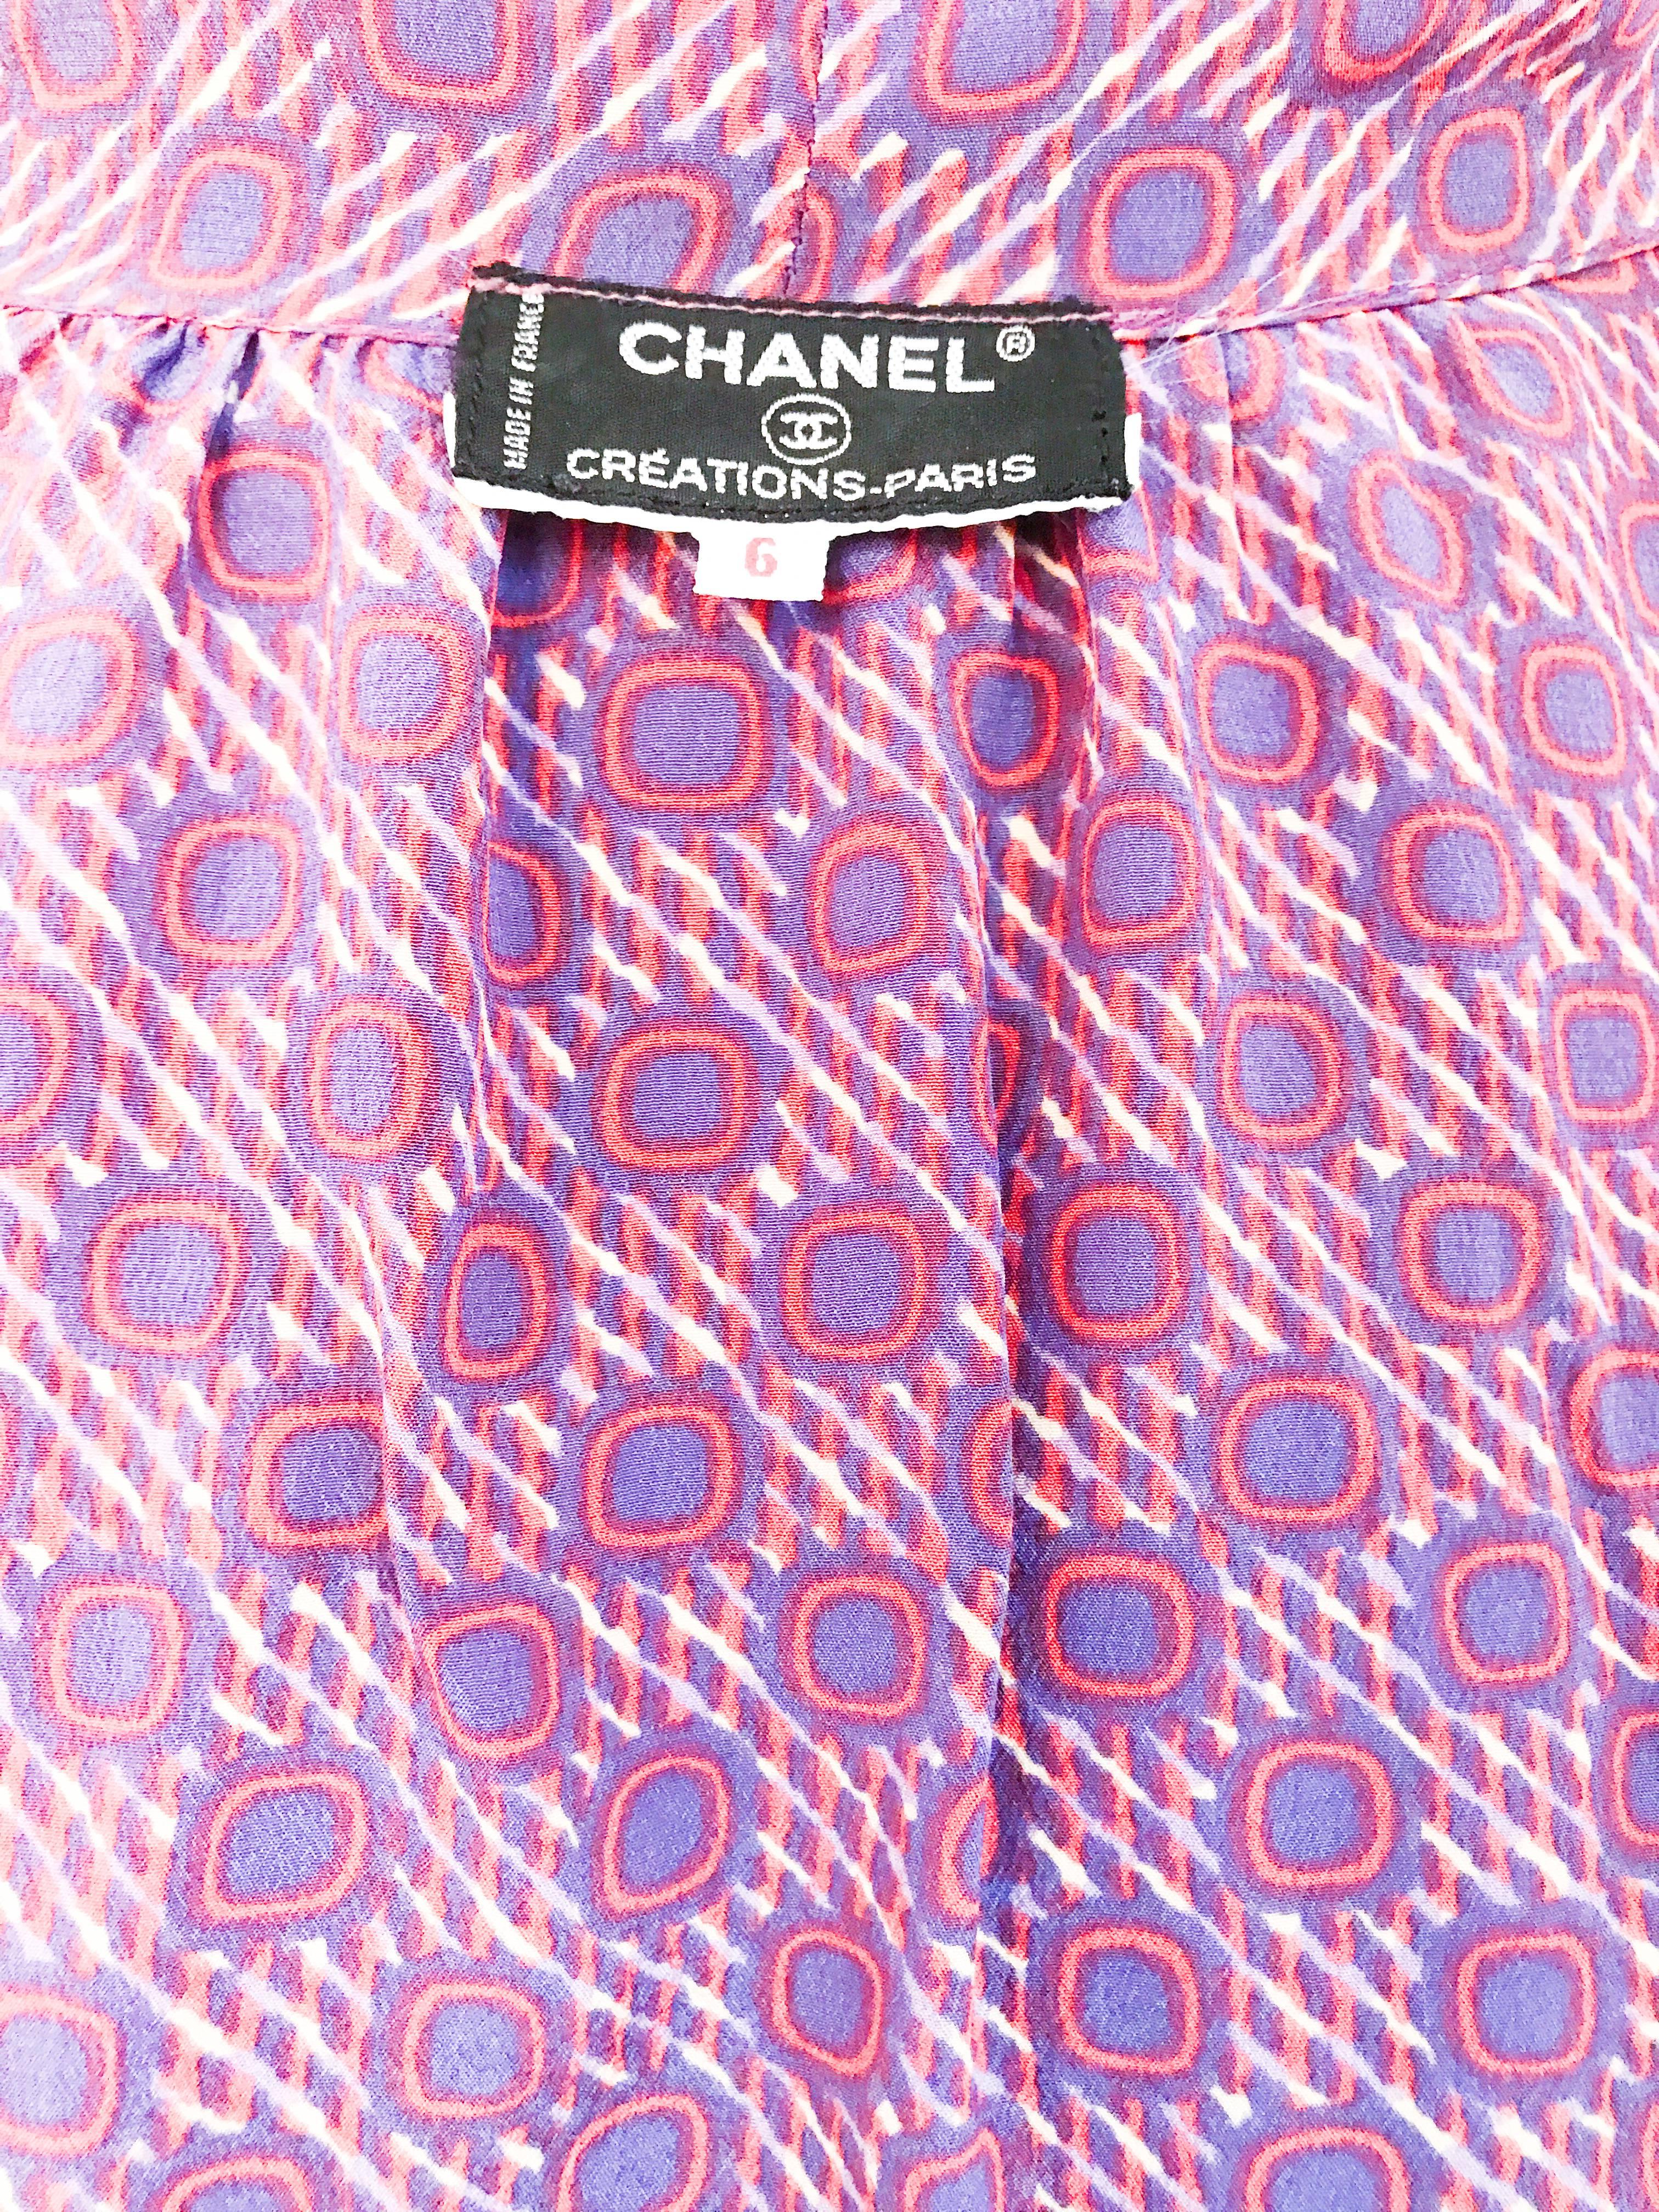 1970s Chanel Silk Printed Blouse with Attached Scarf 2